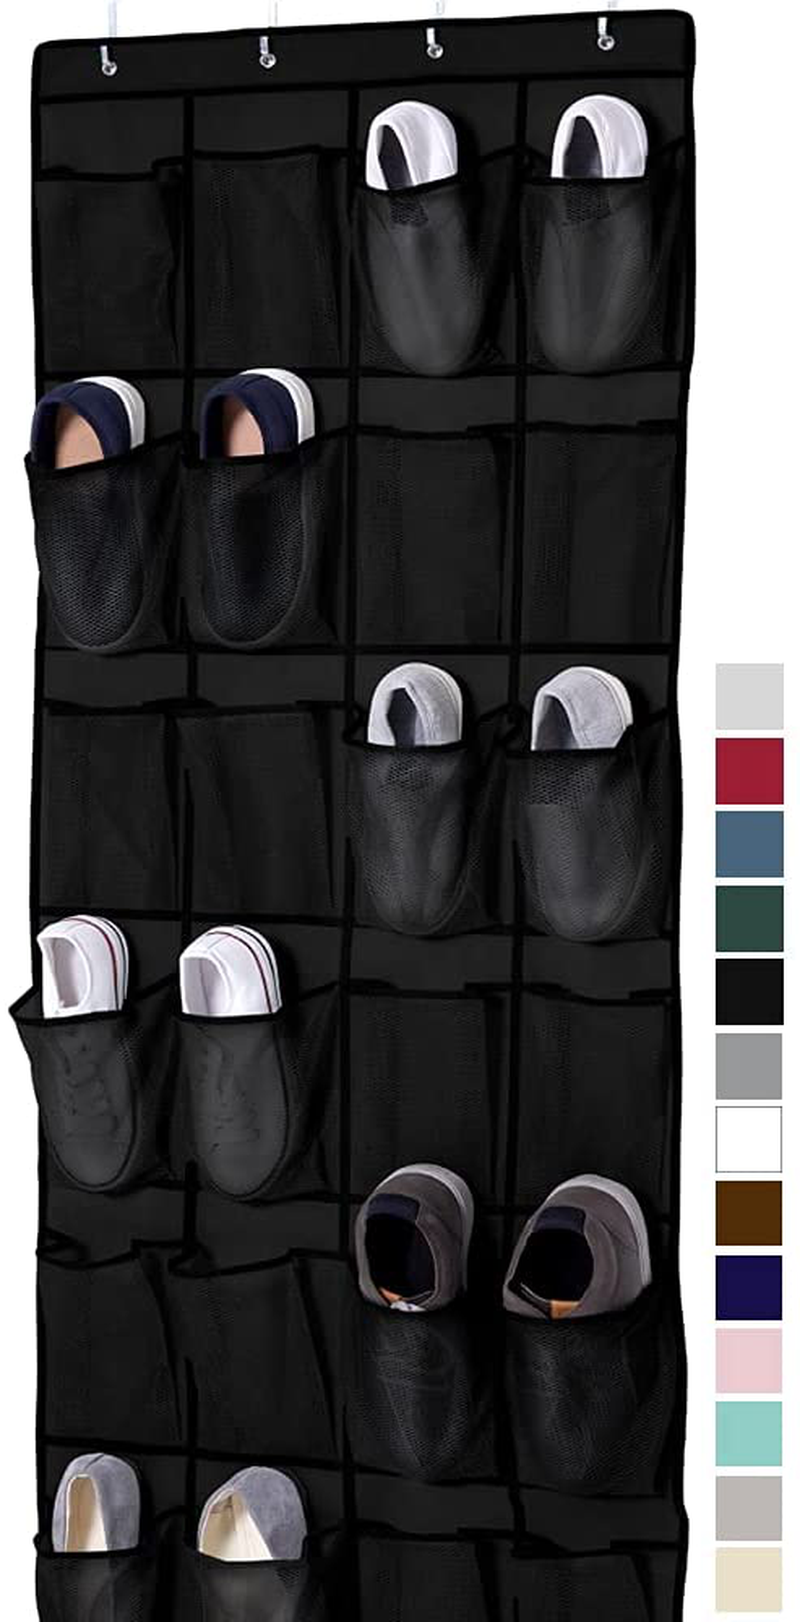 Gorilla Grip Large 24 Pocket Shoe Organizer, Breathable Mesh, Holds Up to 40 Pounds, Sturdy Hooks, Space Saving, Over Door, Storage Rack Hangs on Closets for Shoes, Sneakers or Home Accessories, Black